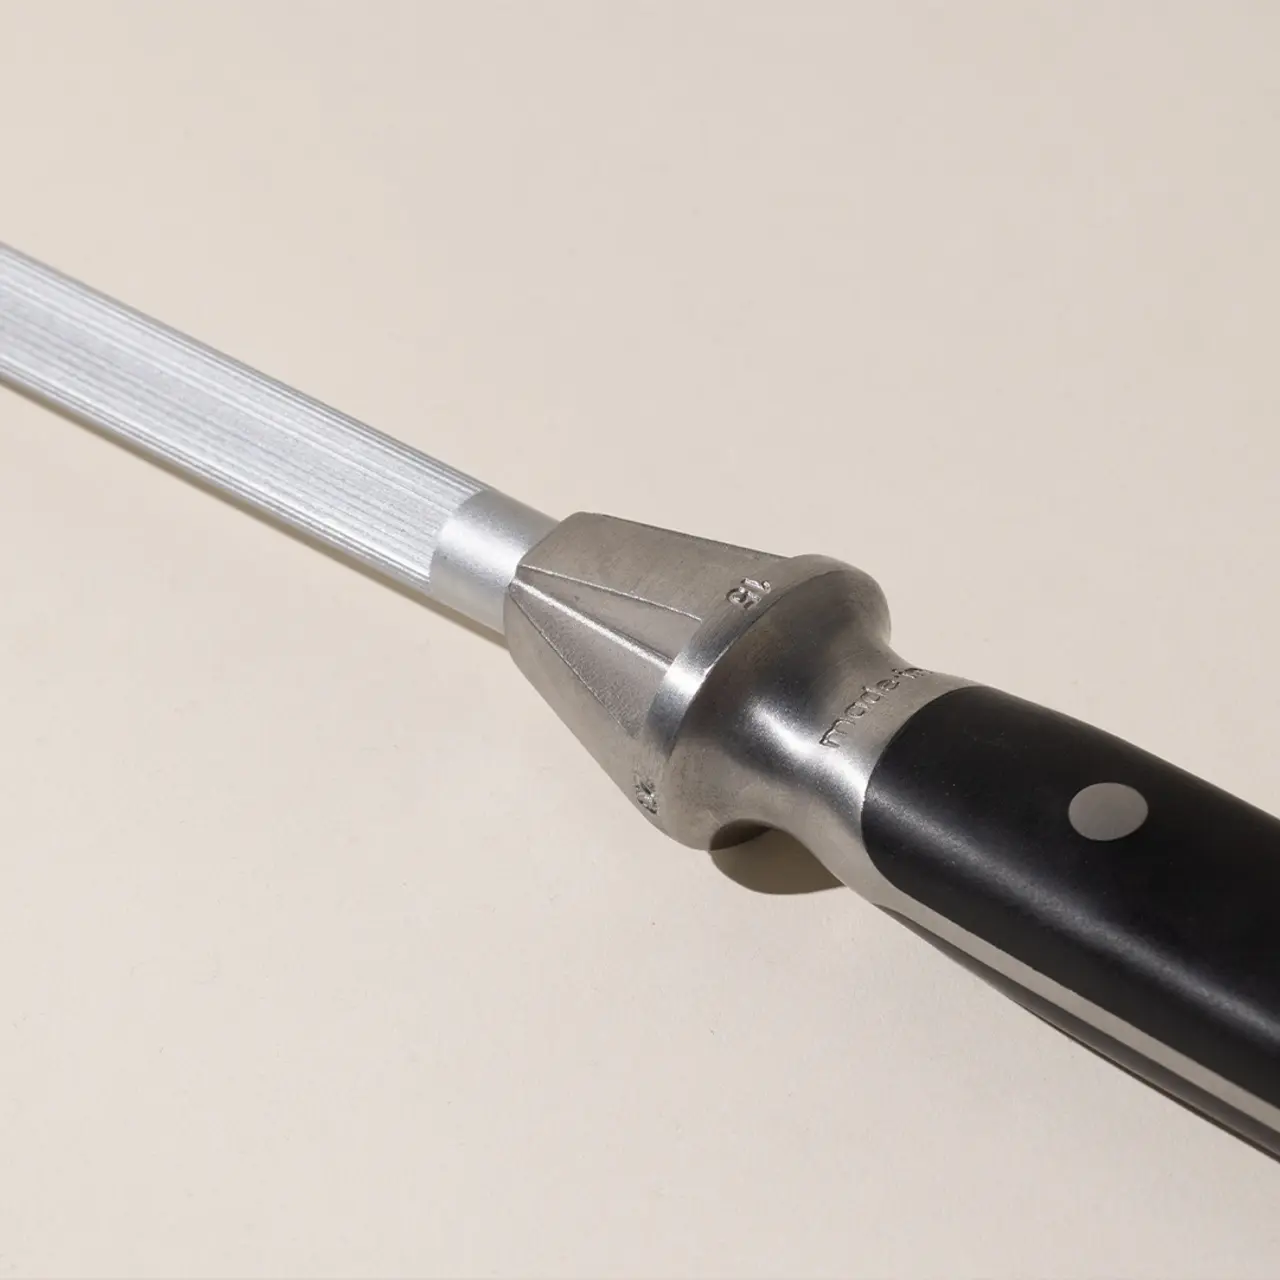 A close-up of a tuning fork positioned diagonally against a plain background showcases its metallic tines and black handle.